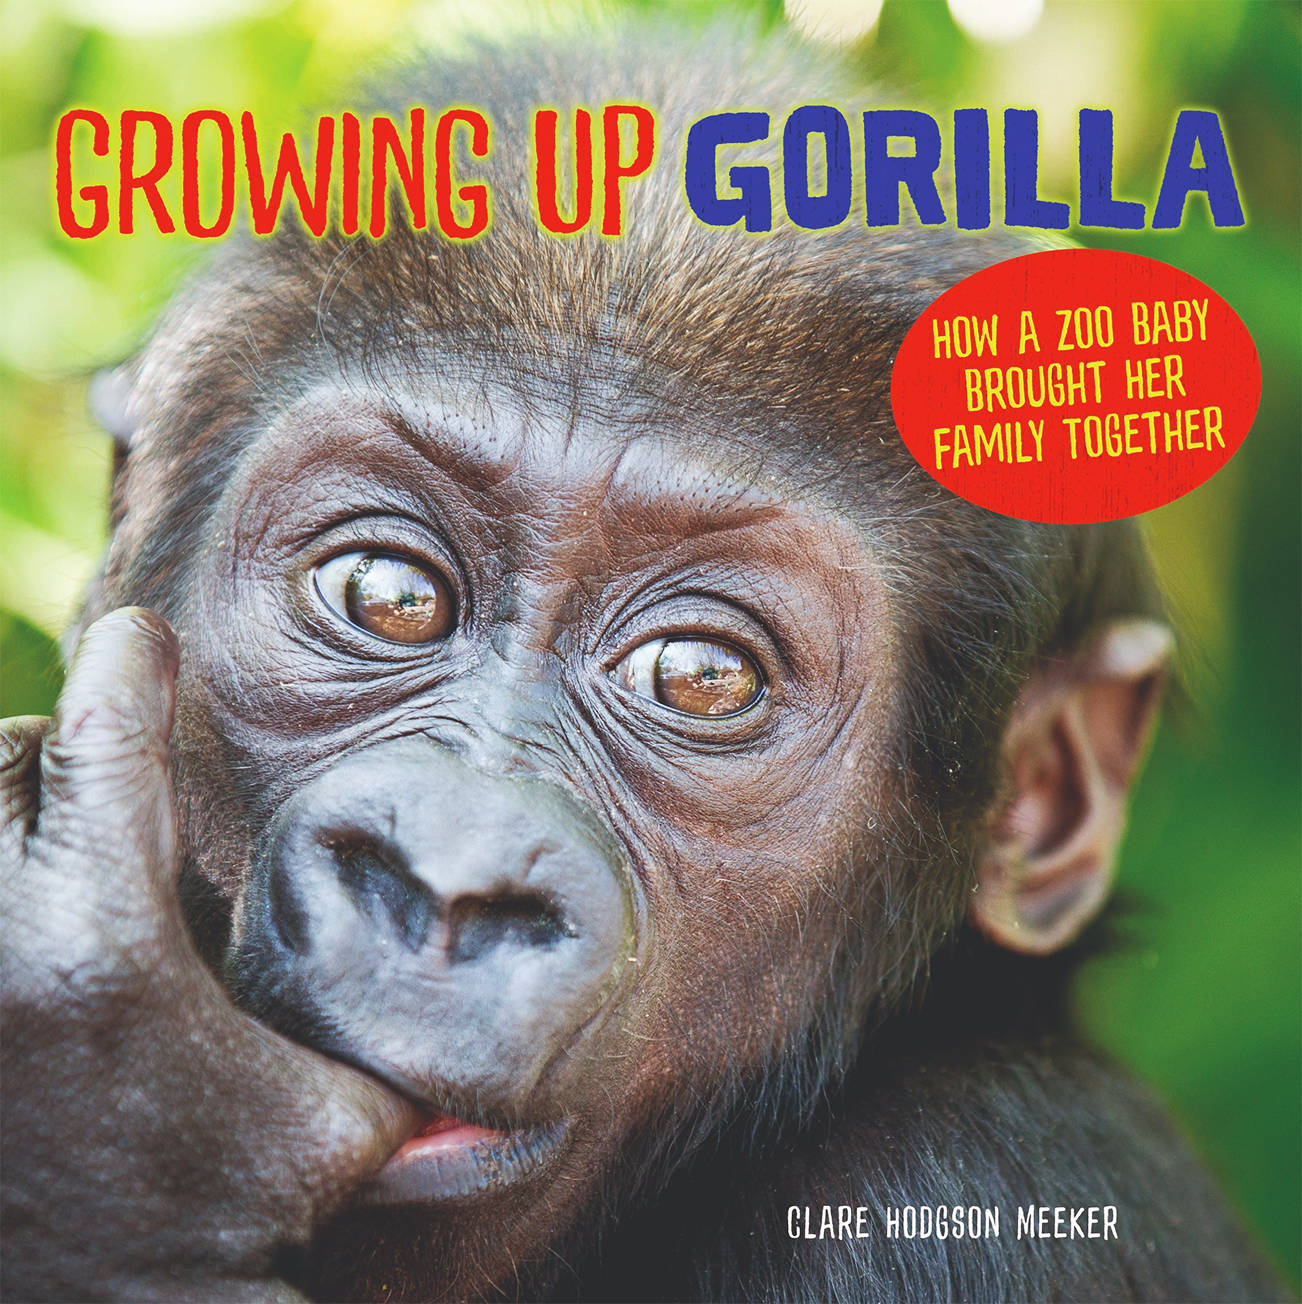 ”Growing Up Gorilla,” by Clare Hodgson Meeker. (Contributed photo)